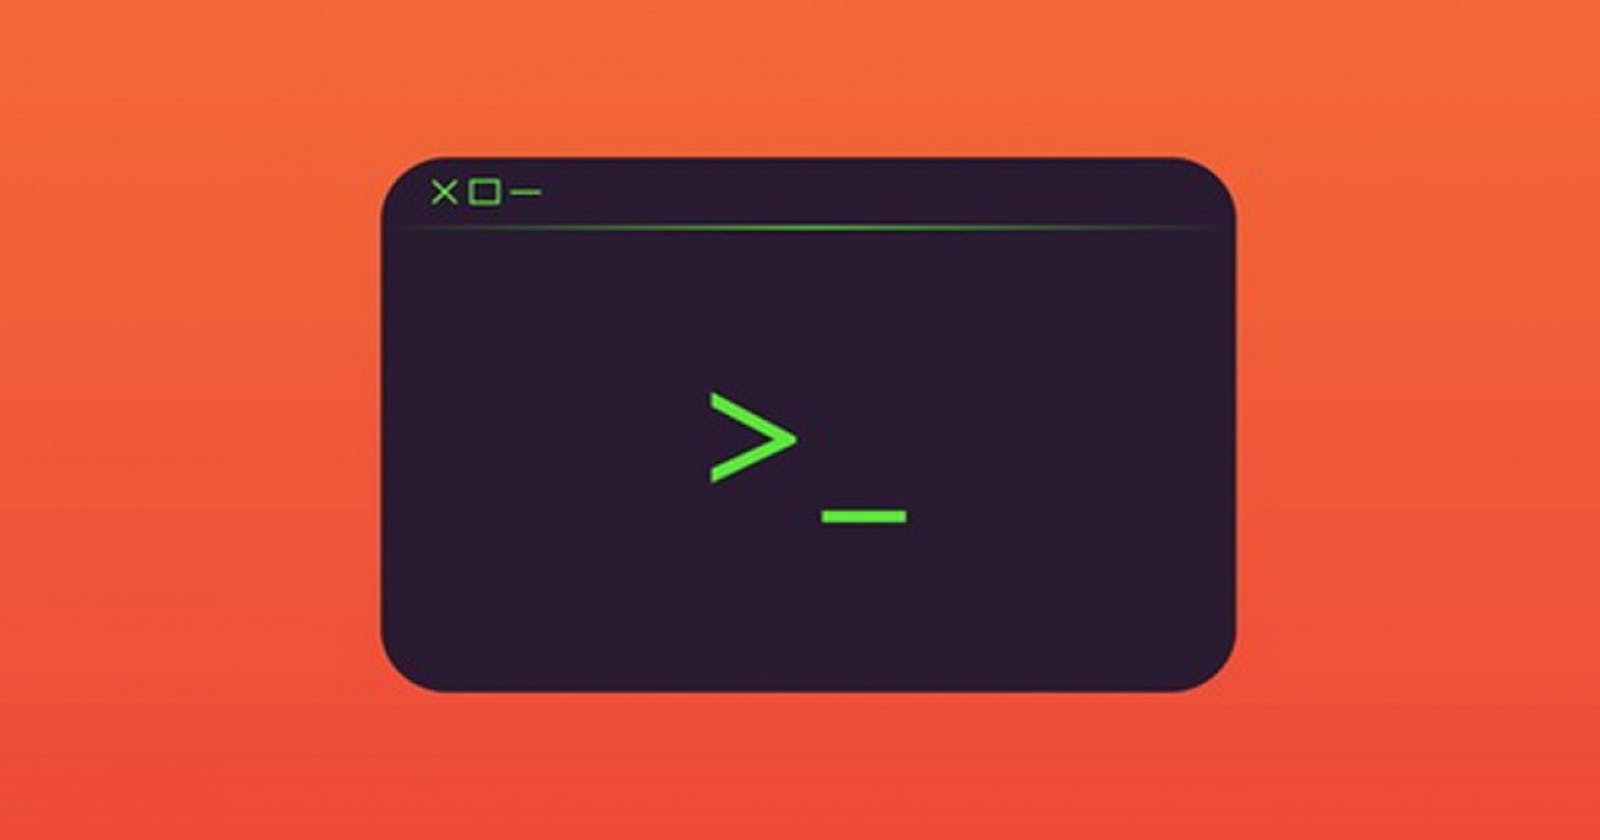 How To Build CLI App In Rust Using Clap - Part 5